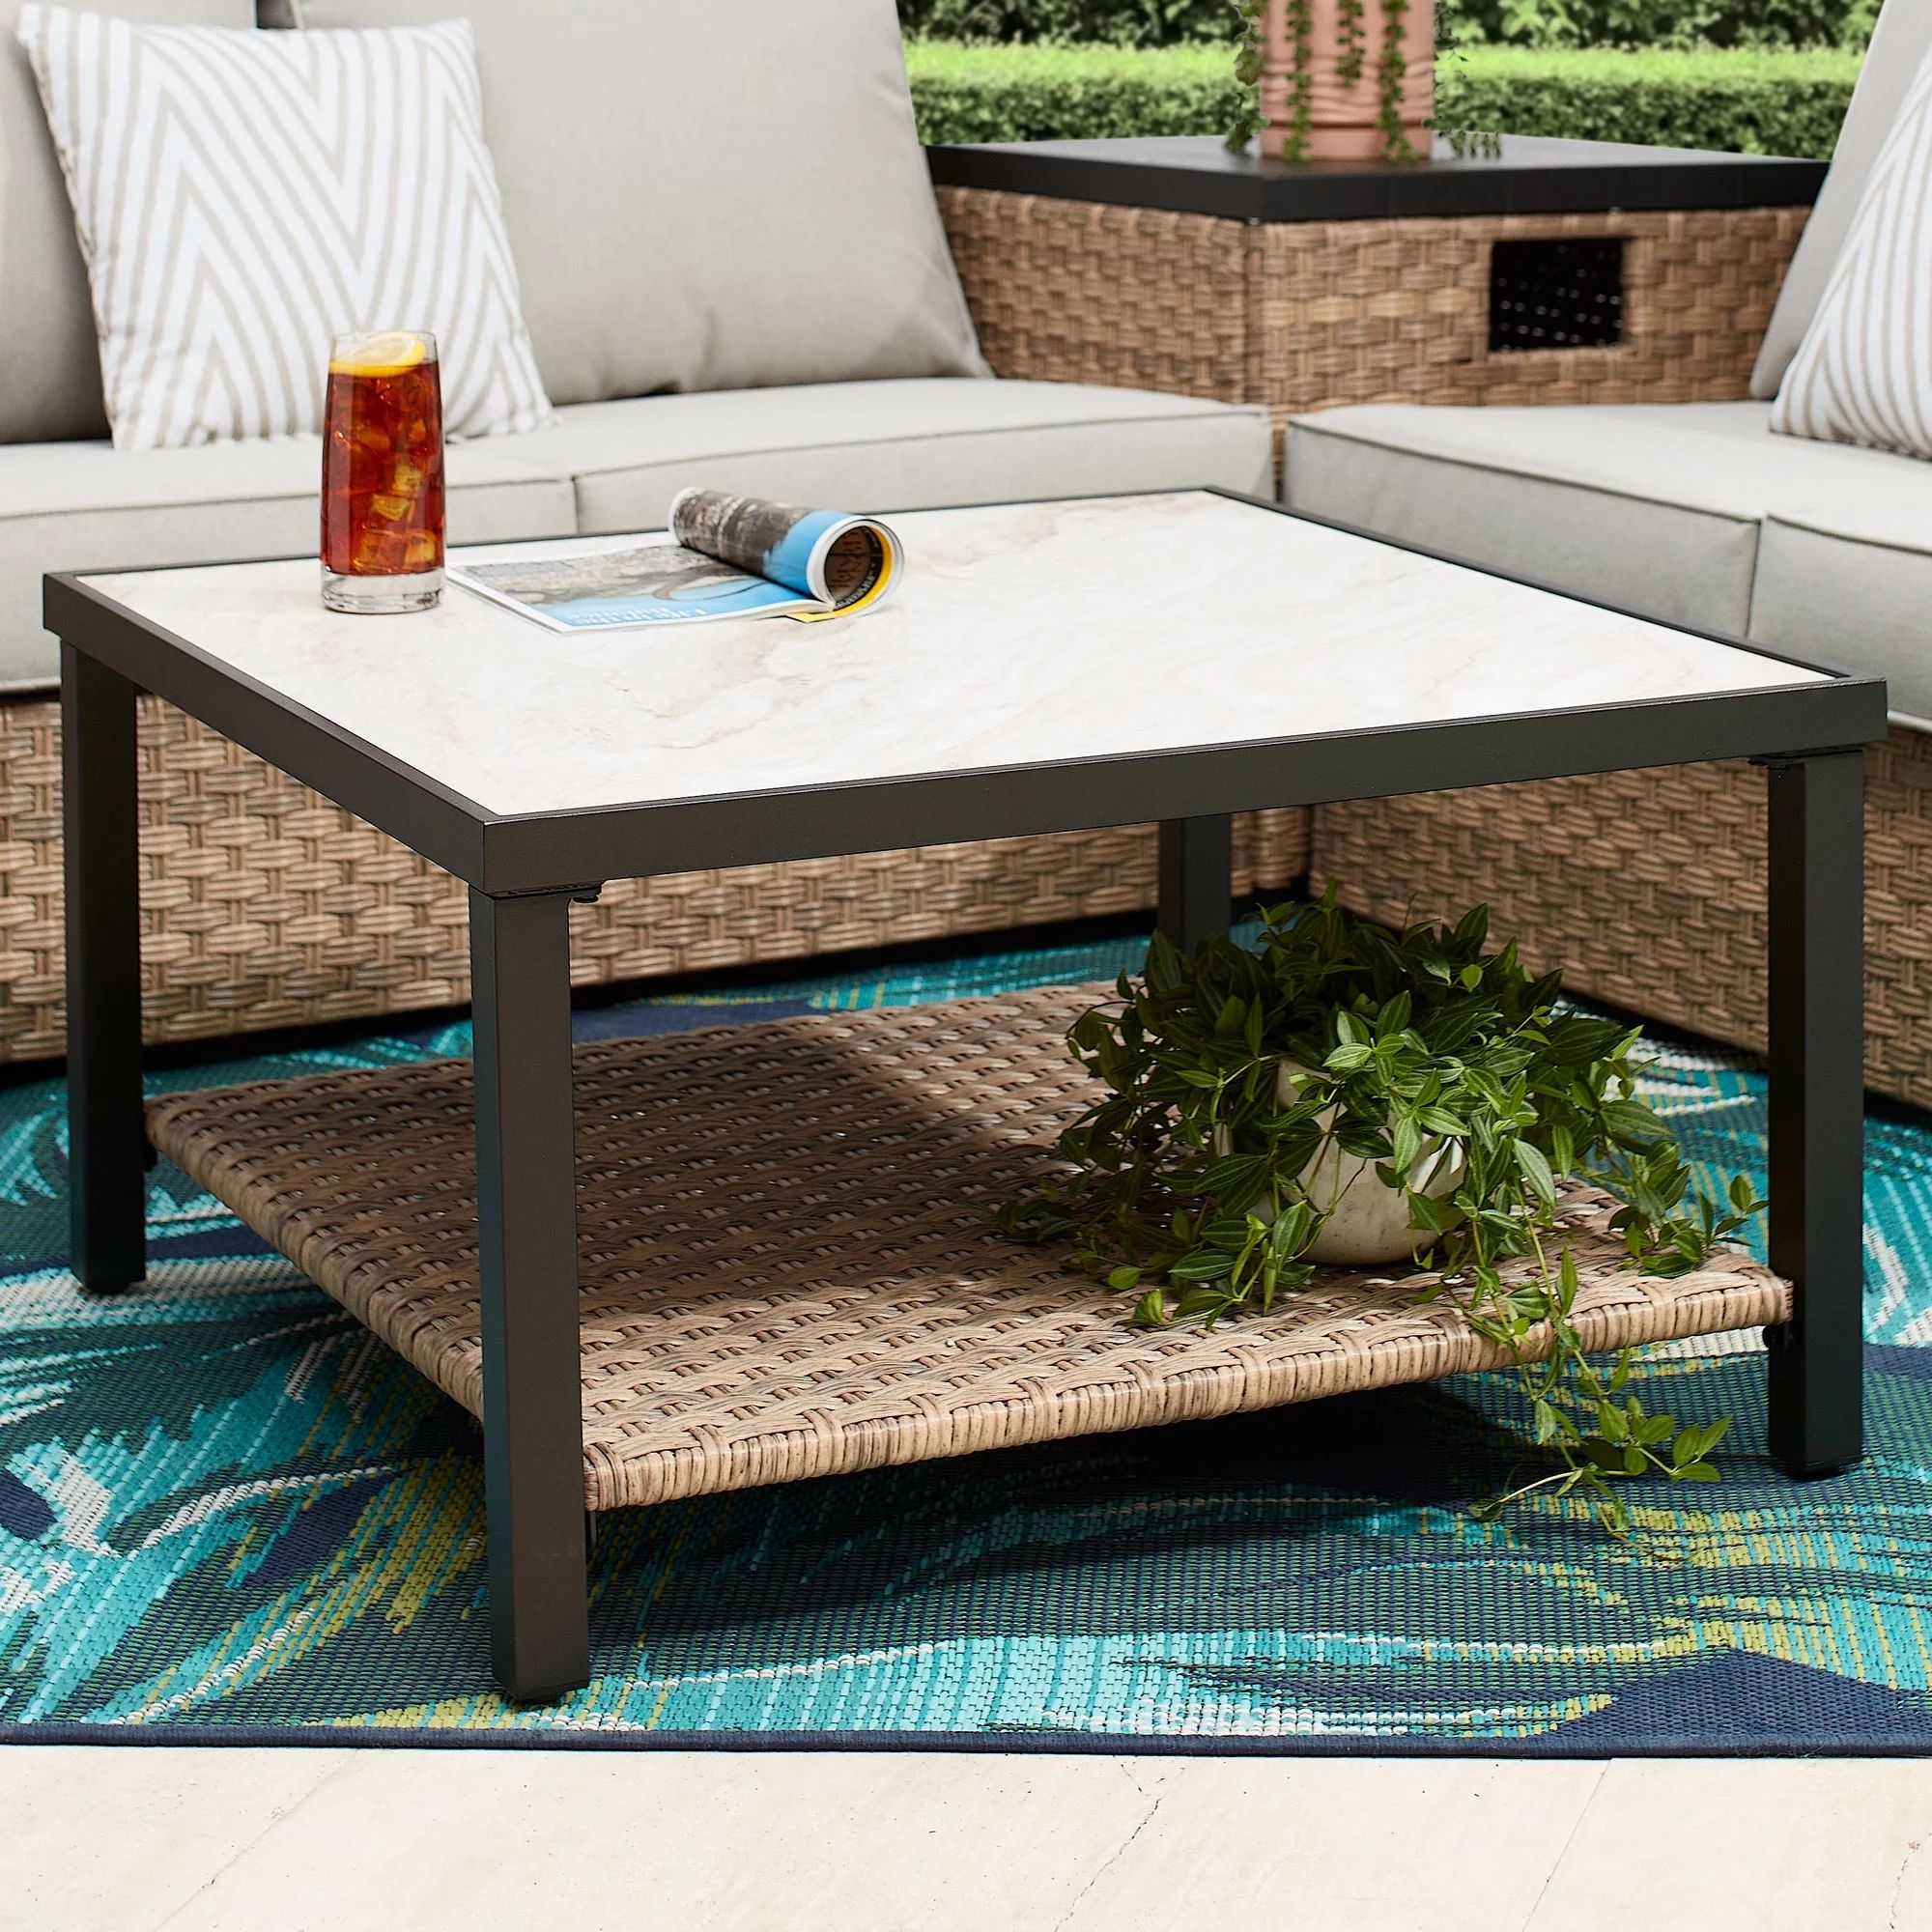 Better Homes & Gardens River Oaks Tile Top Coffee Table with All-Weather Wicker Shelf, White | Walmart (US)